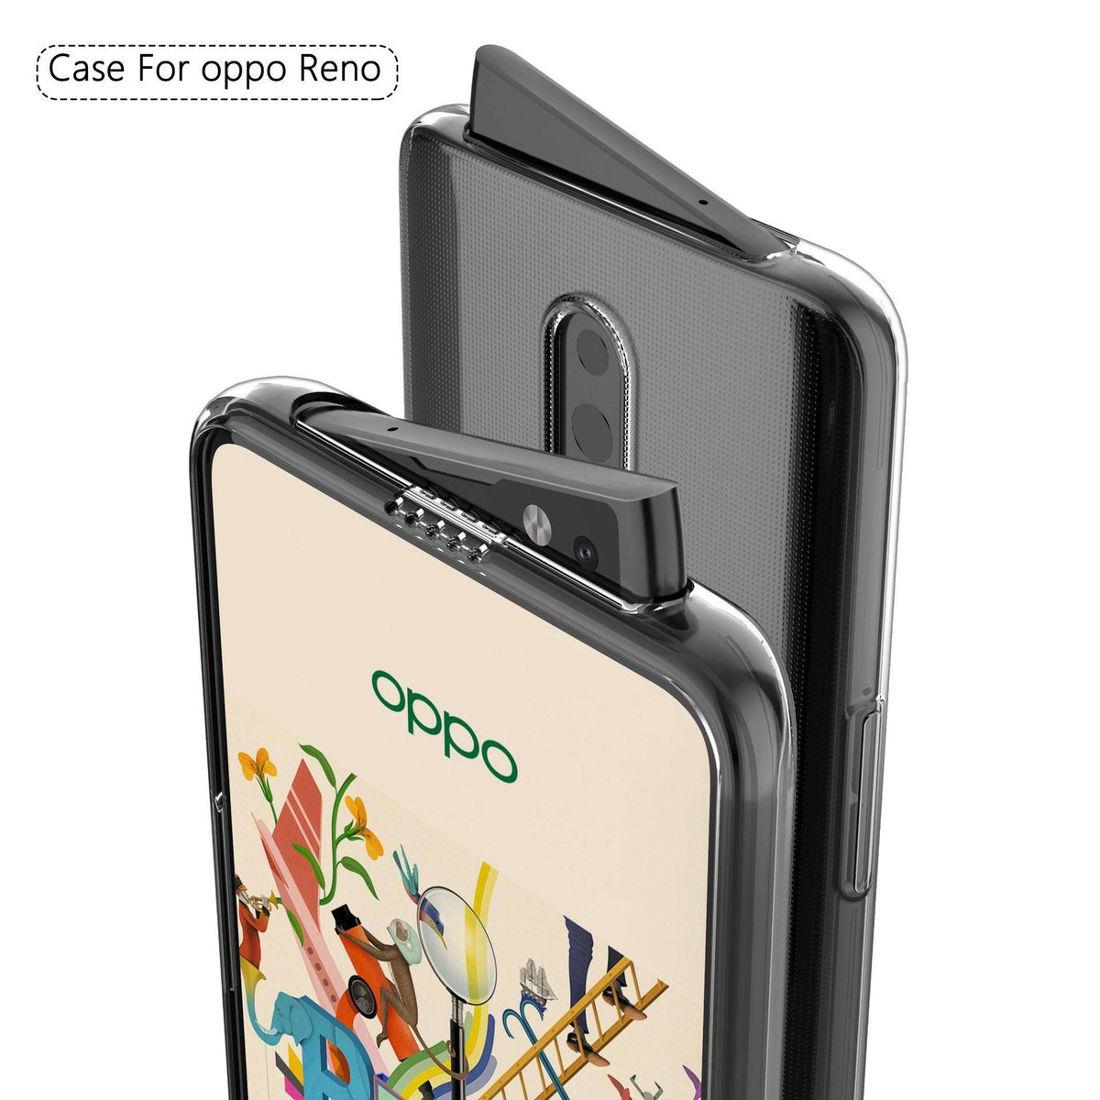 Oppo Reno Features, Specifications, Details